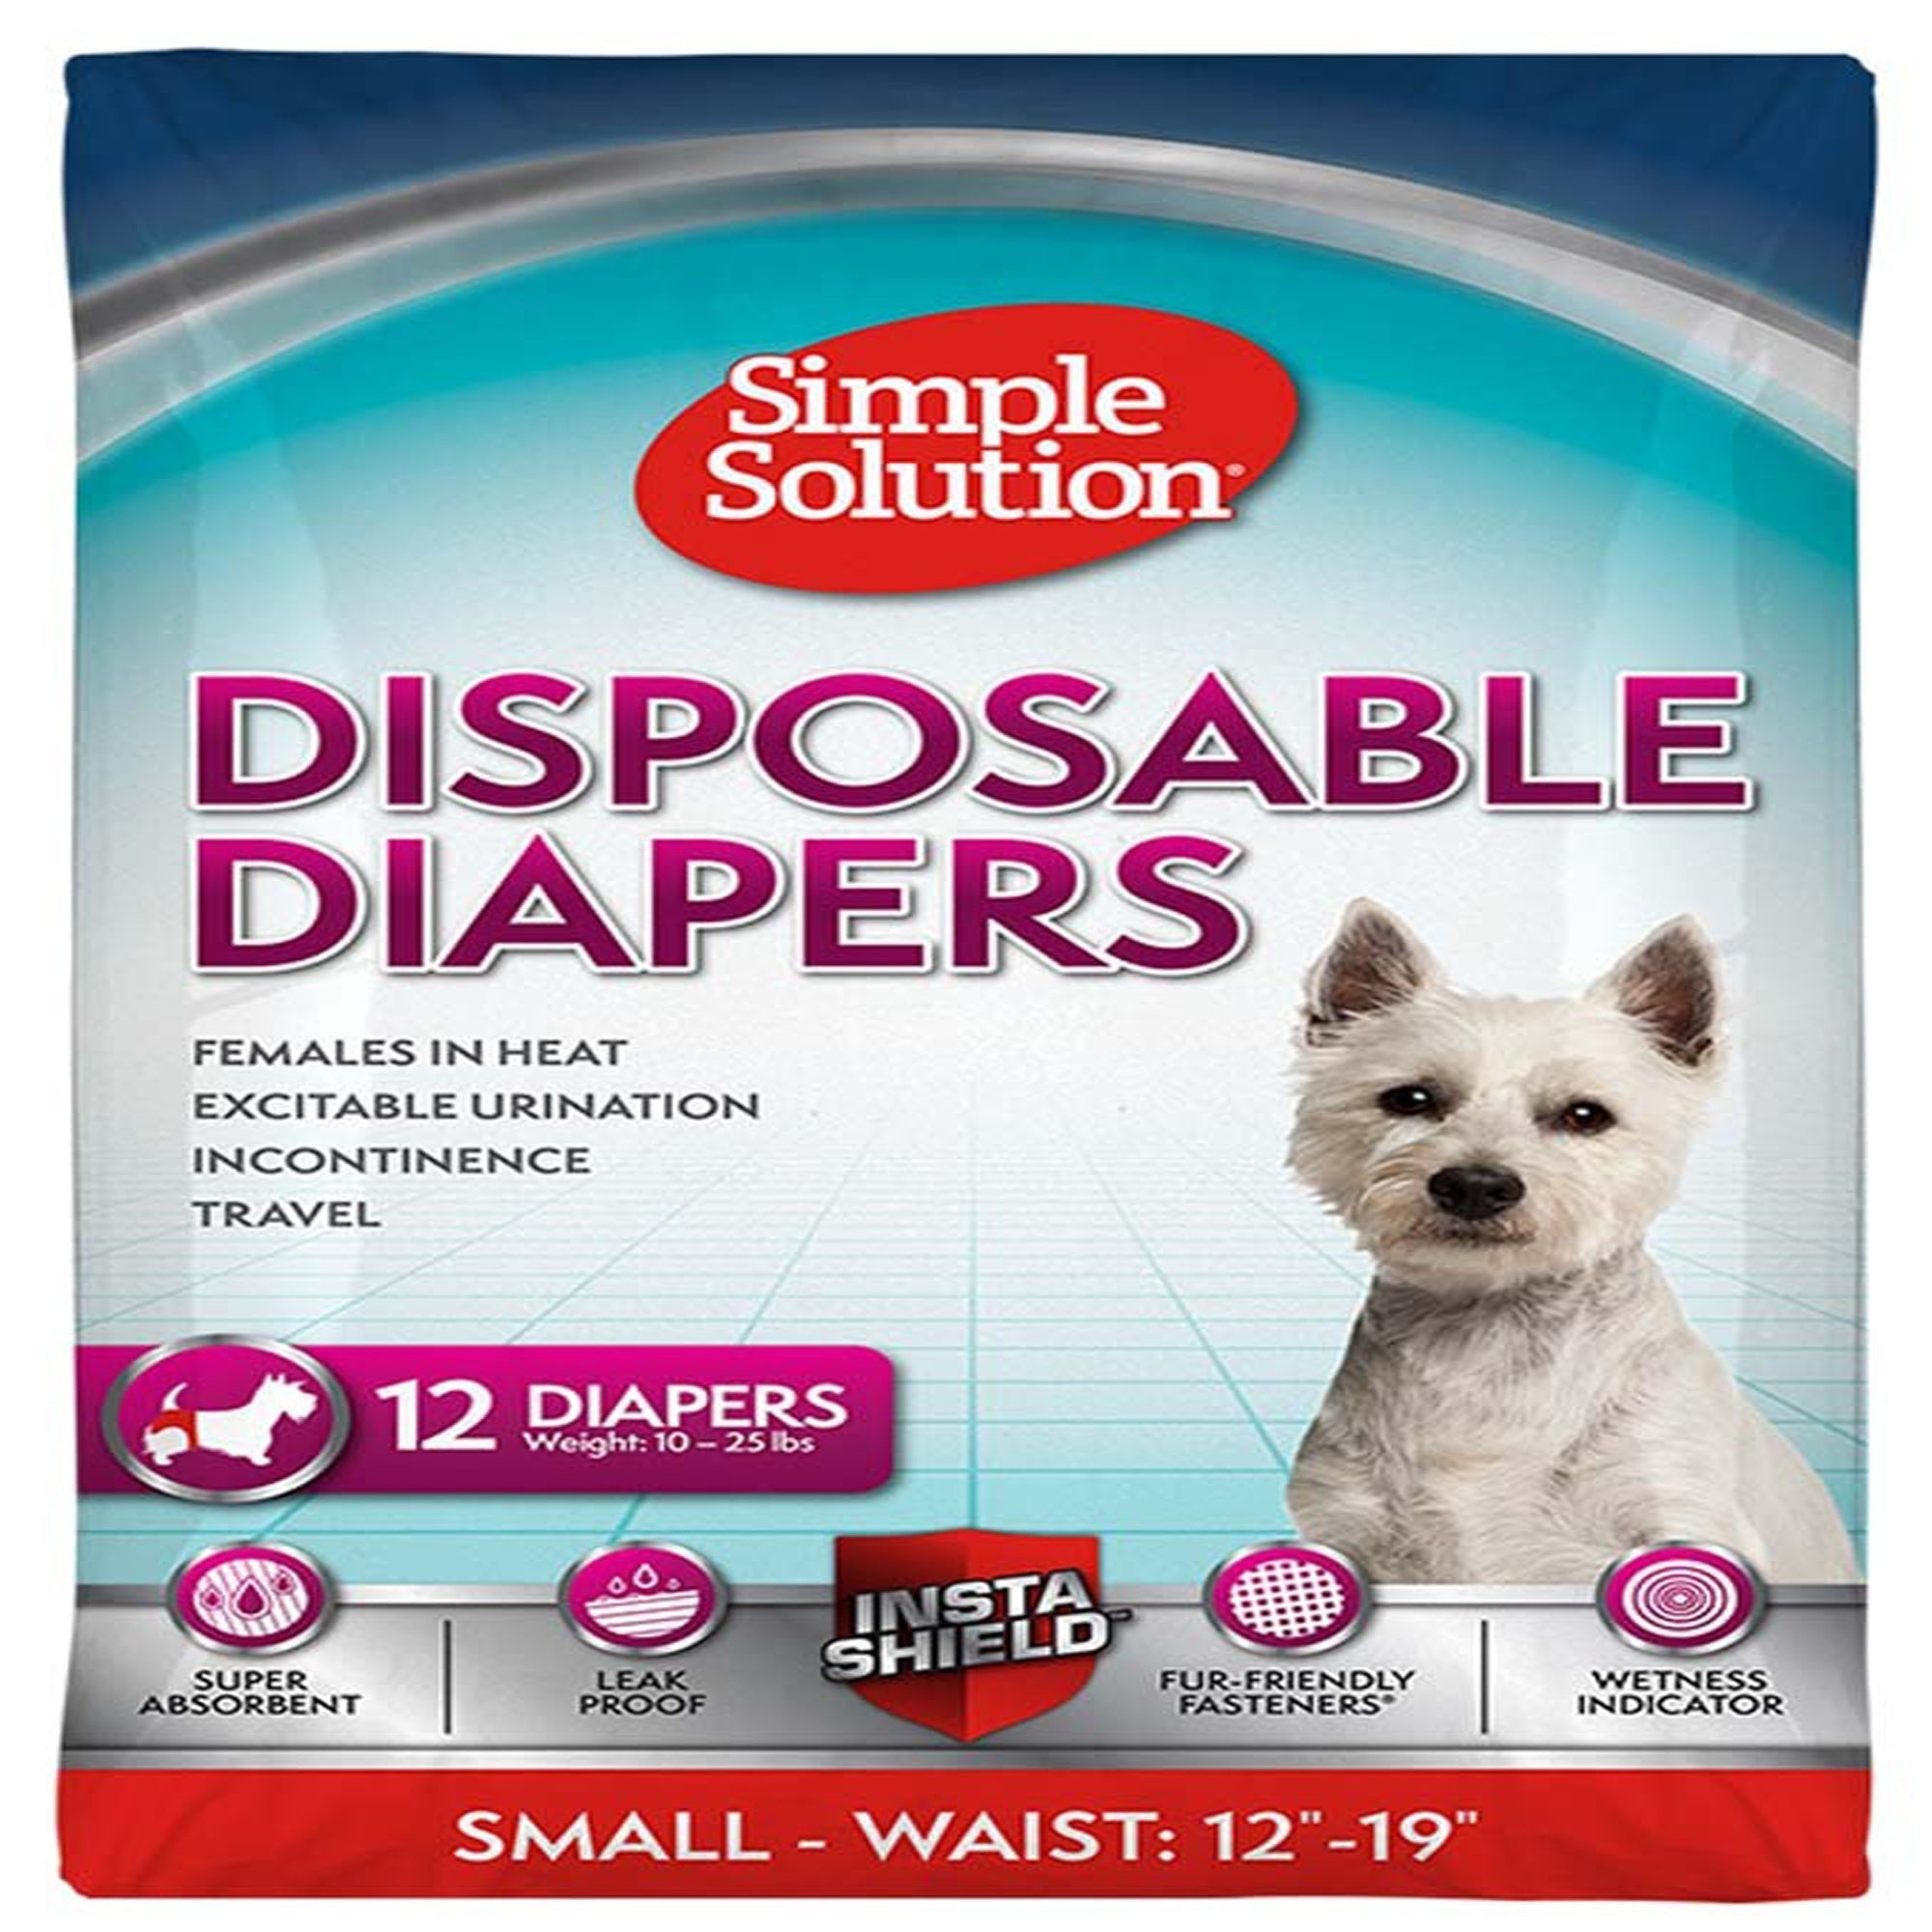 Simple Solution Disposable Diapers White 1ea/SM, 12 pk